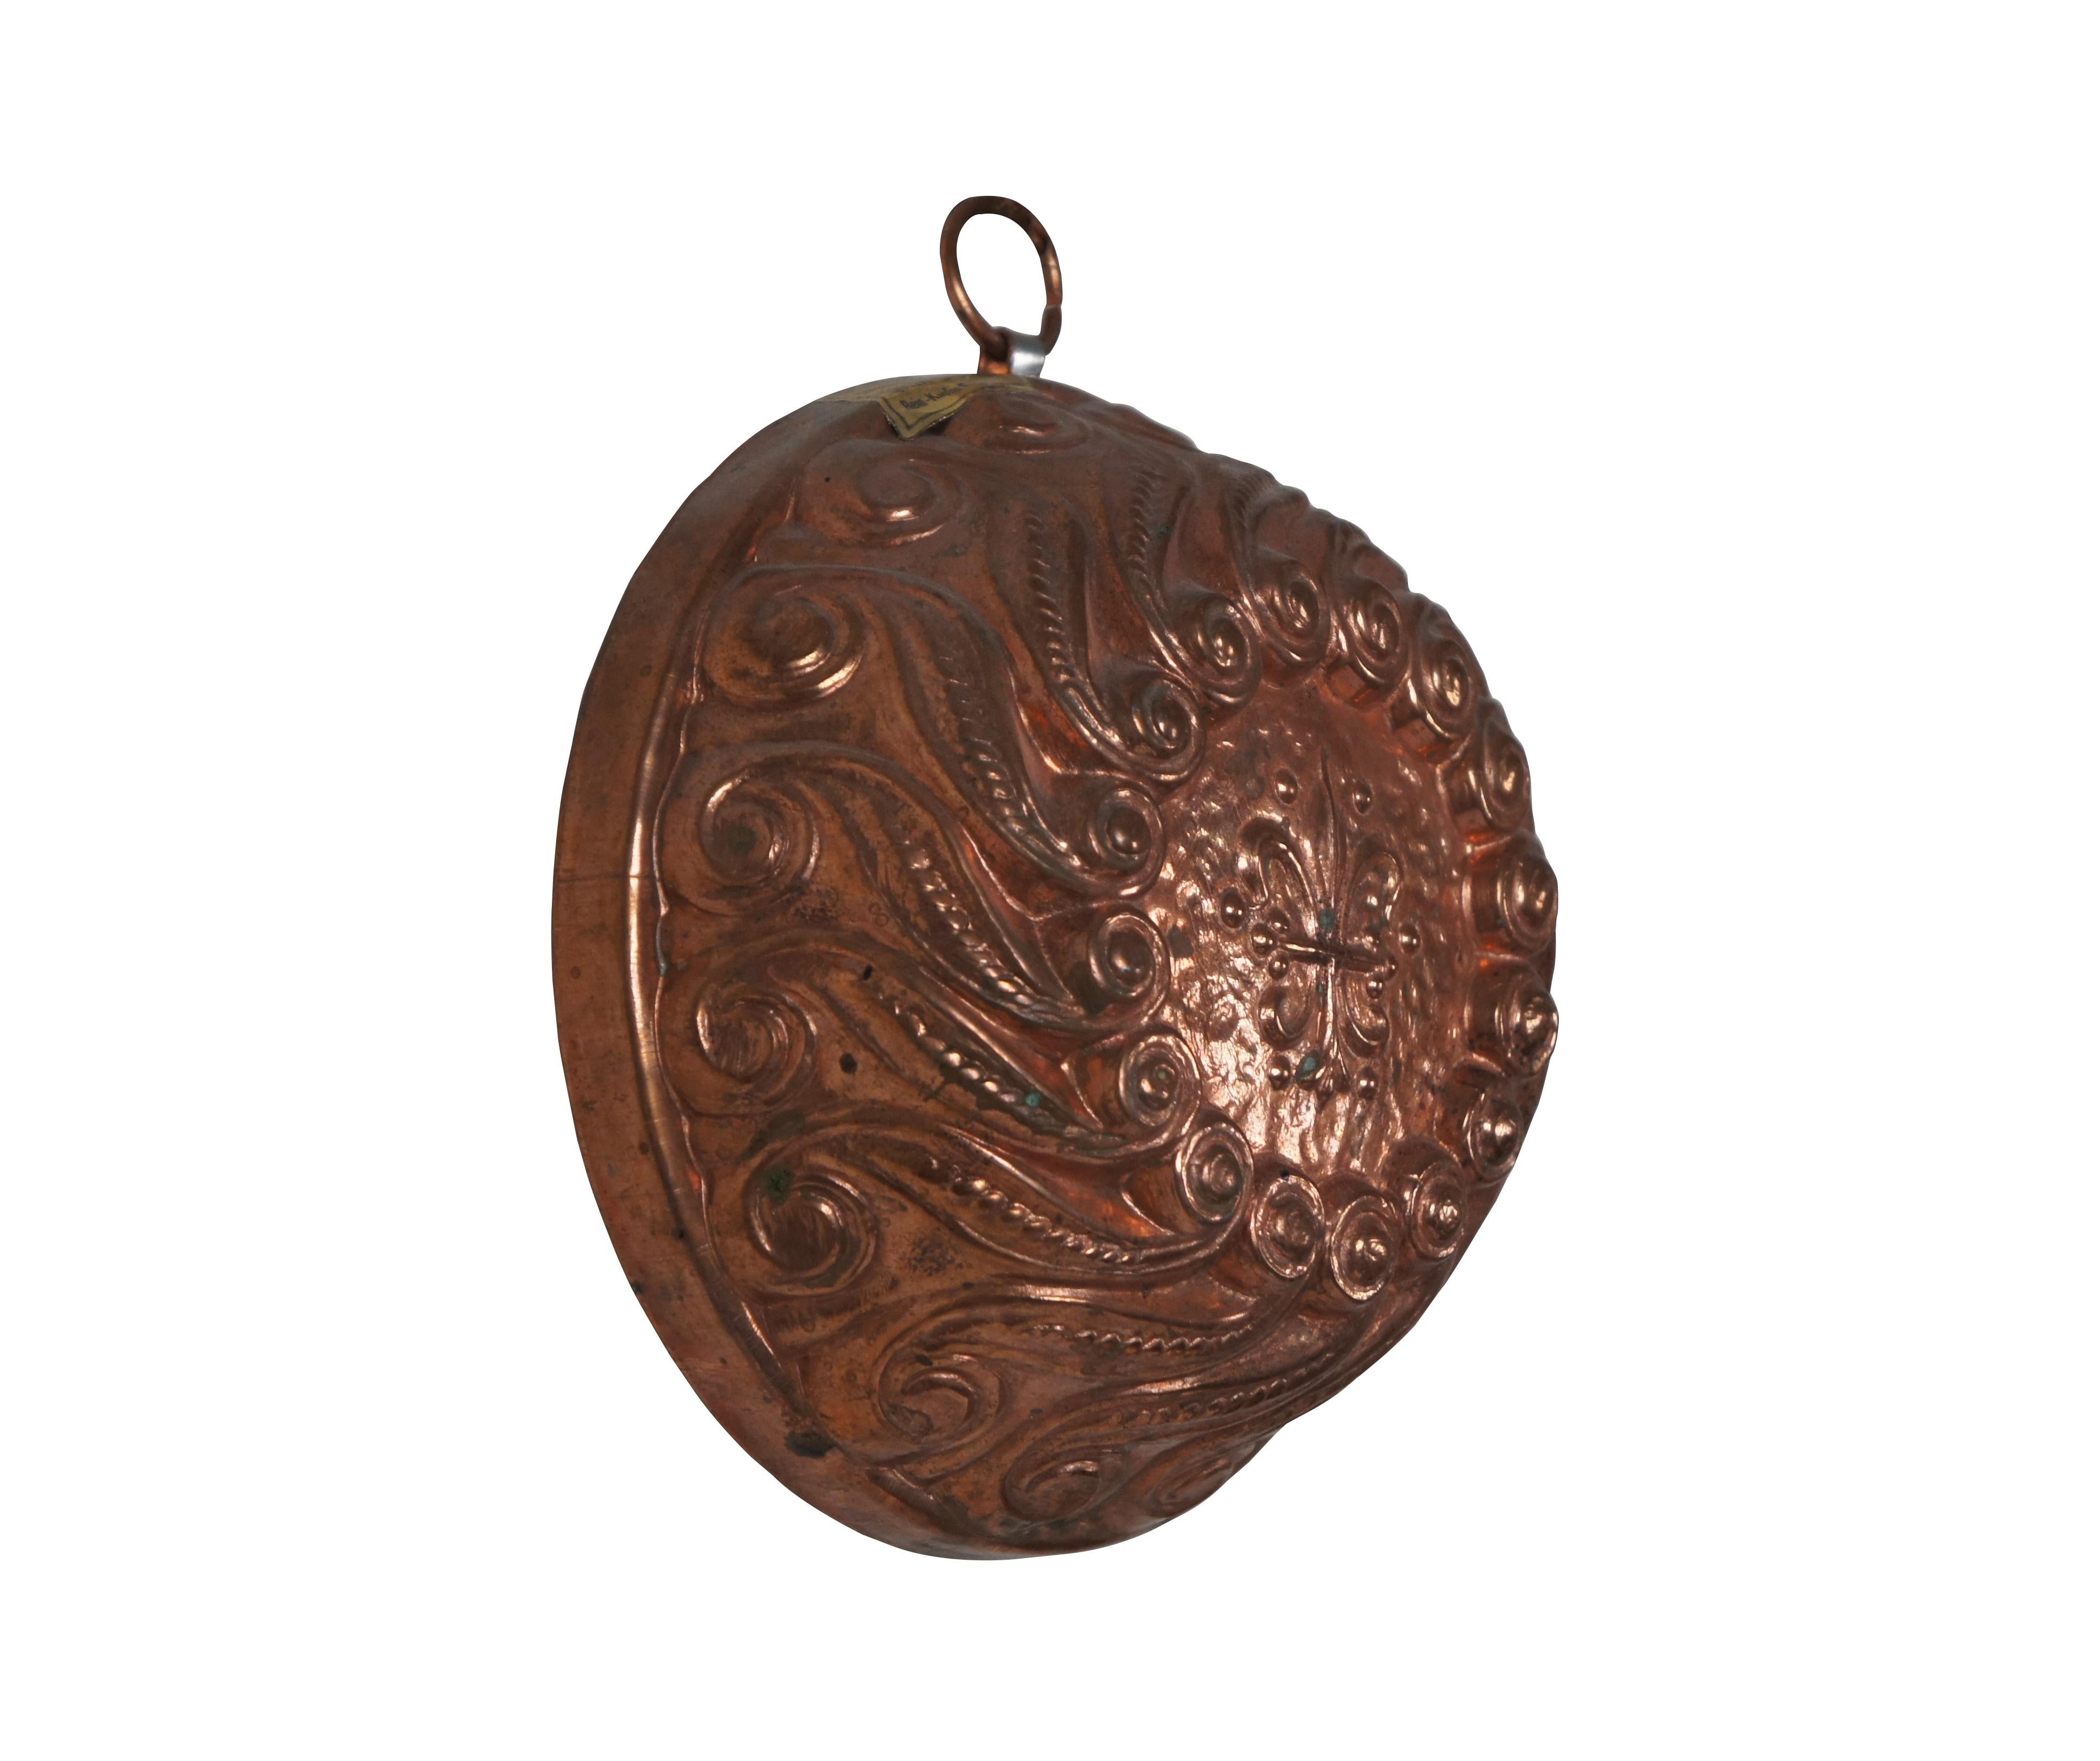 Vintage baking / pudding / jelly / chocolate mold by Birth-Gramm. Swiss made solid copper with tin lining and copper hanging ring. Round form decorated with a motif of what appear to be pea pods with scrolling tips and top emblazoned with a fleur de